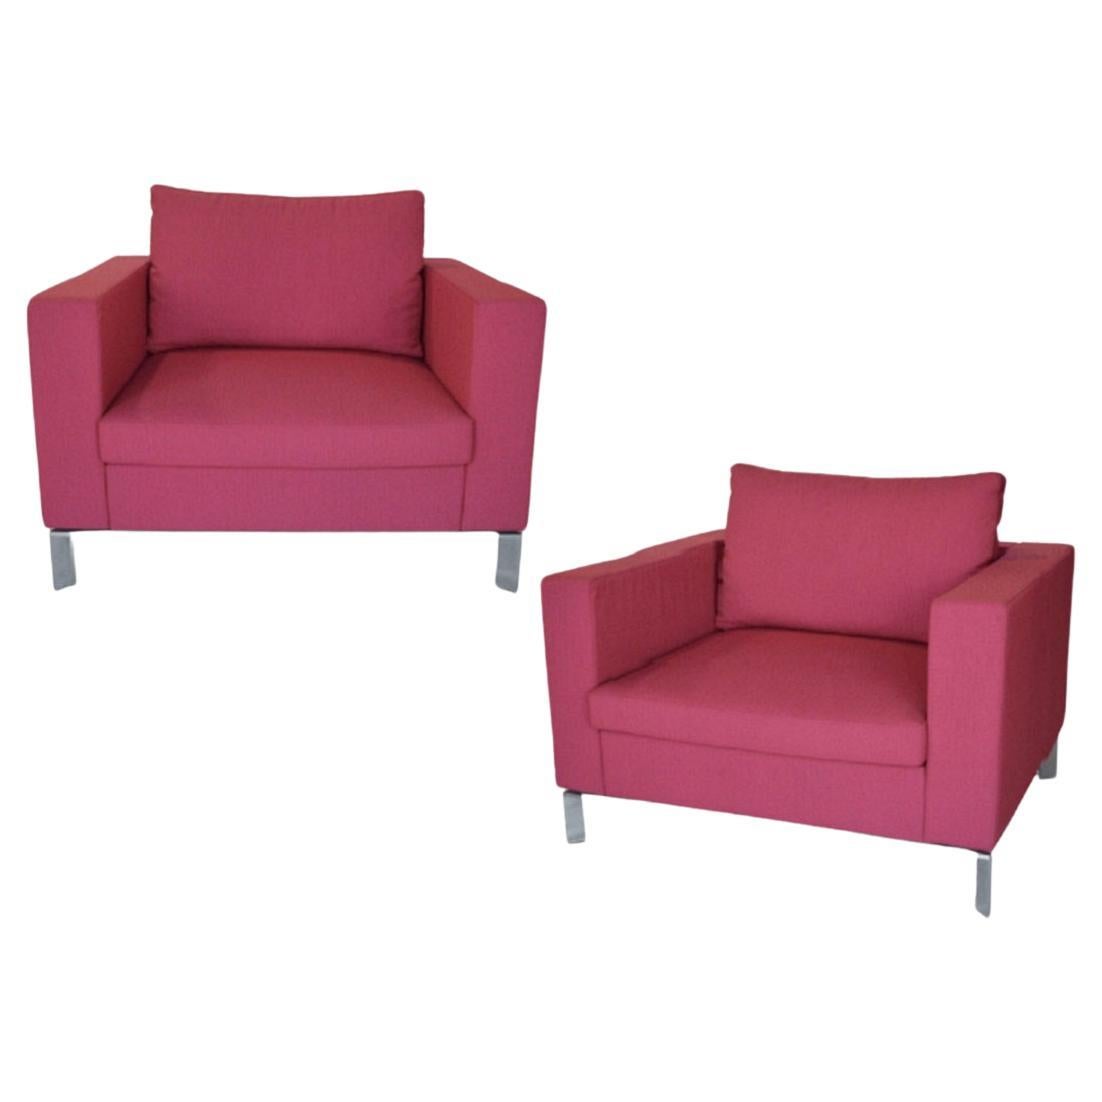 Pair of Pink Upholstered Allermuir Stirling Armchairs, England, C. 2000s